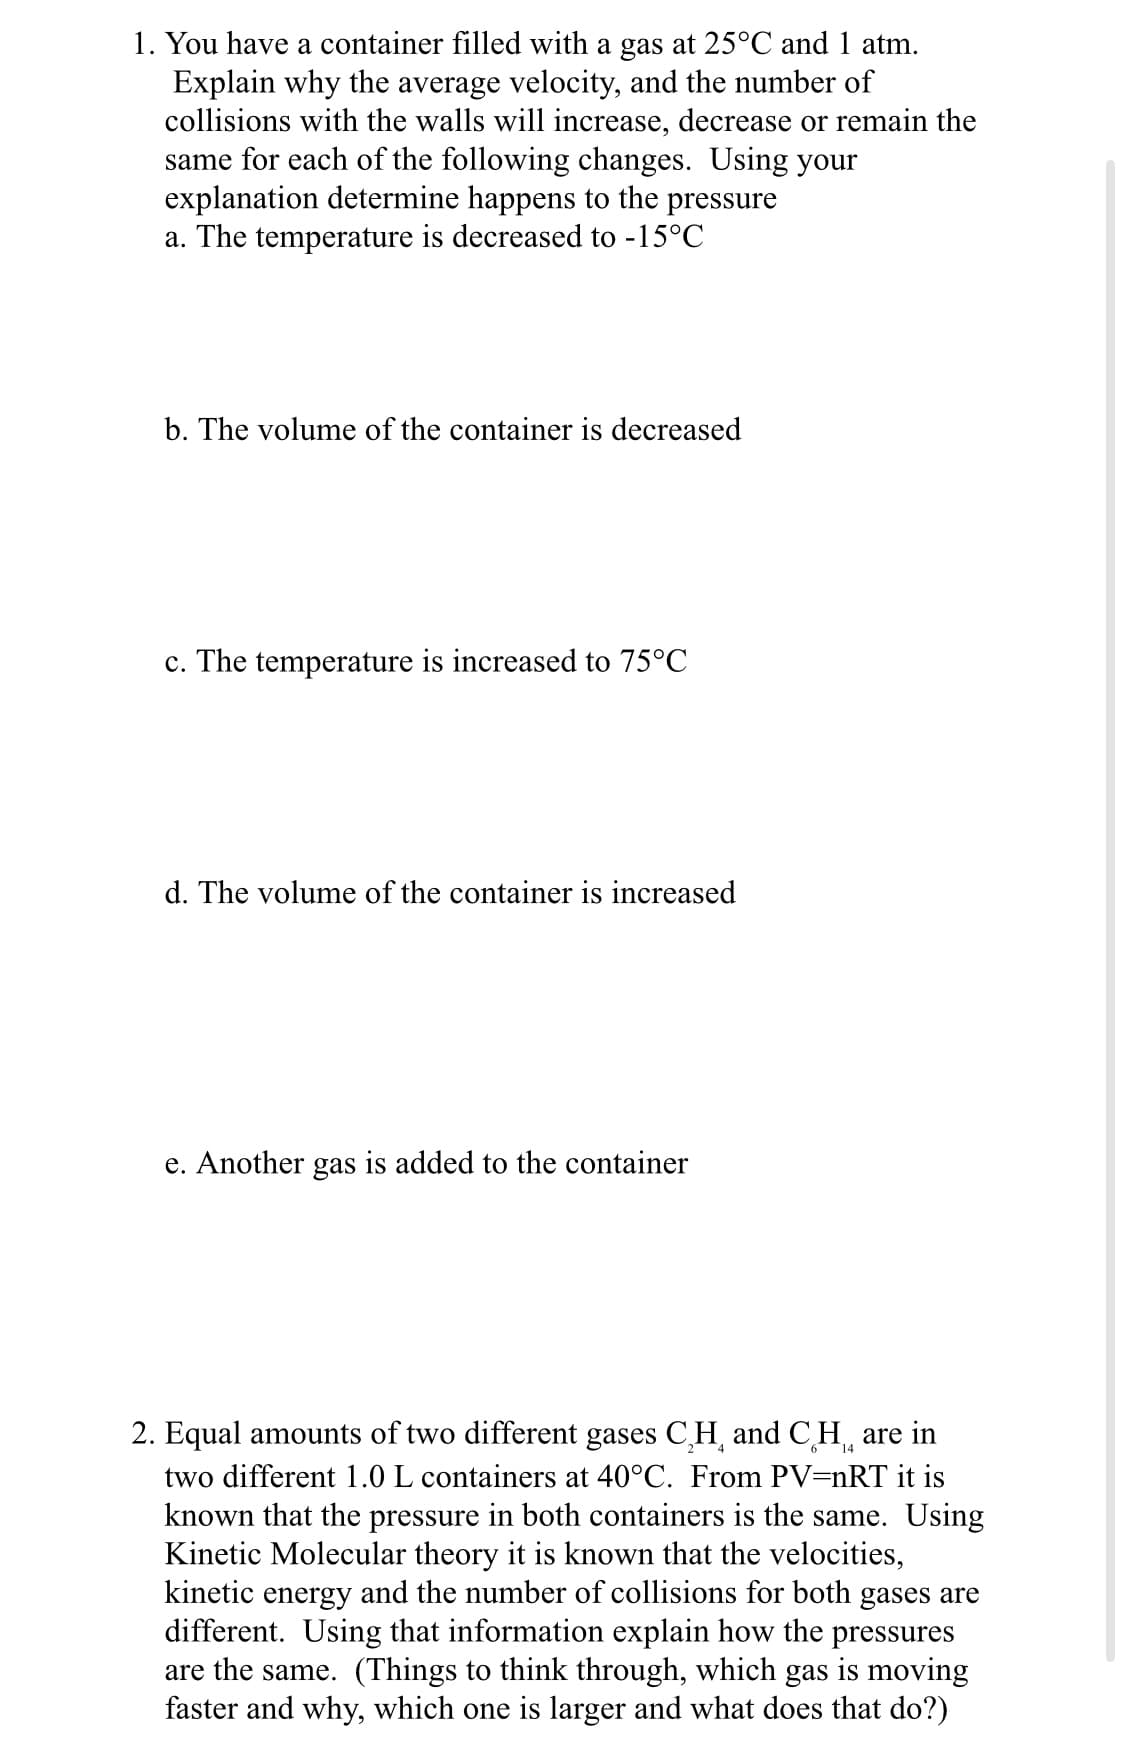 1. You have a container filled with a gas at 25°C and 1 atm.
Explain why the average velocity, and the number of
collisions with the walls will increase, decrease or remain the
same for each of the following changes. Using your
explanation determine happens to the pressure
a. The temperature is decreased to -15°C
b. The volume of the container is decreased
c. The temperature is increased to 75°C
d. The volume of the container is increased
e. Another gas is added to the container
14
2. Equal amounts of two different gases C₂H and CH are in
two different 1.0 L containers at 40°C. From PV=nRT it is
known that the pressure in both containers is the same. Using
Kinetic Molecular theory it is known that the velocities,
kinetic energy and the number of collisions for both gases are
different. Using that information explain how the pressures
are the same. (Things to think through, which gas is moving
faster and why, which one is larger and what does that do?)